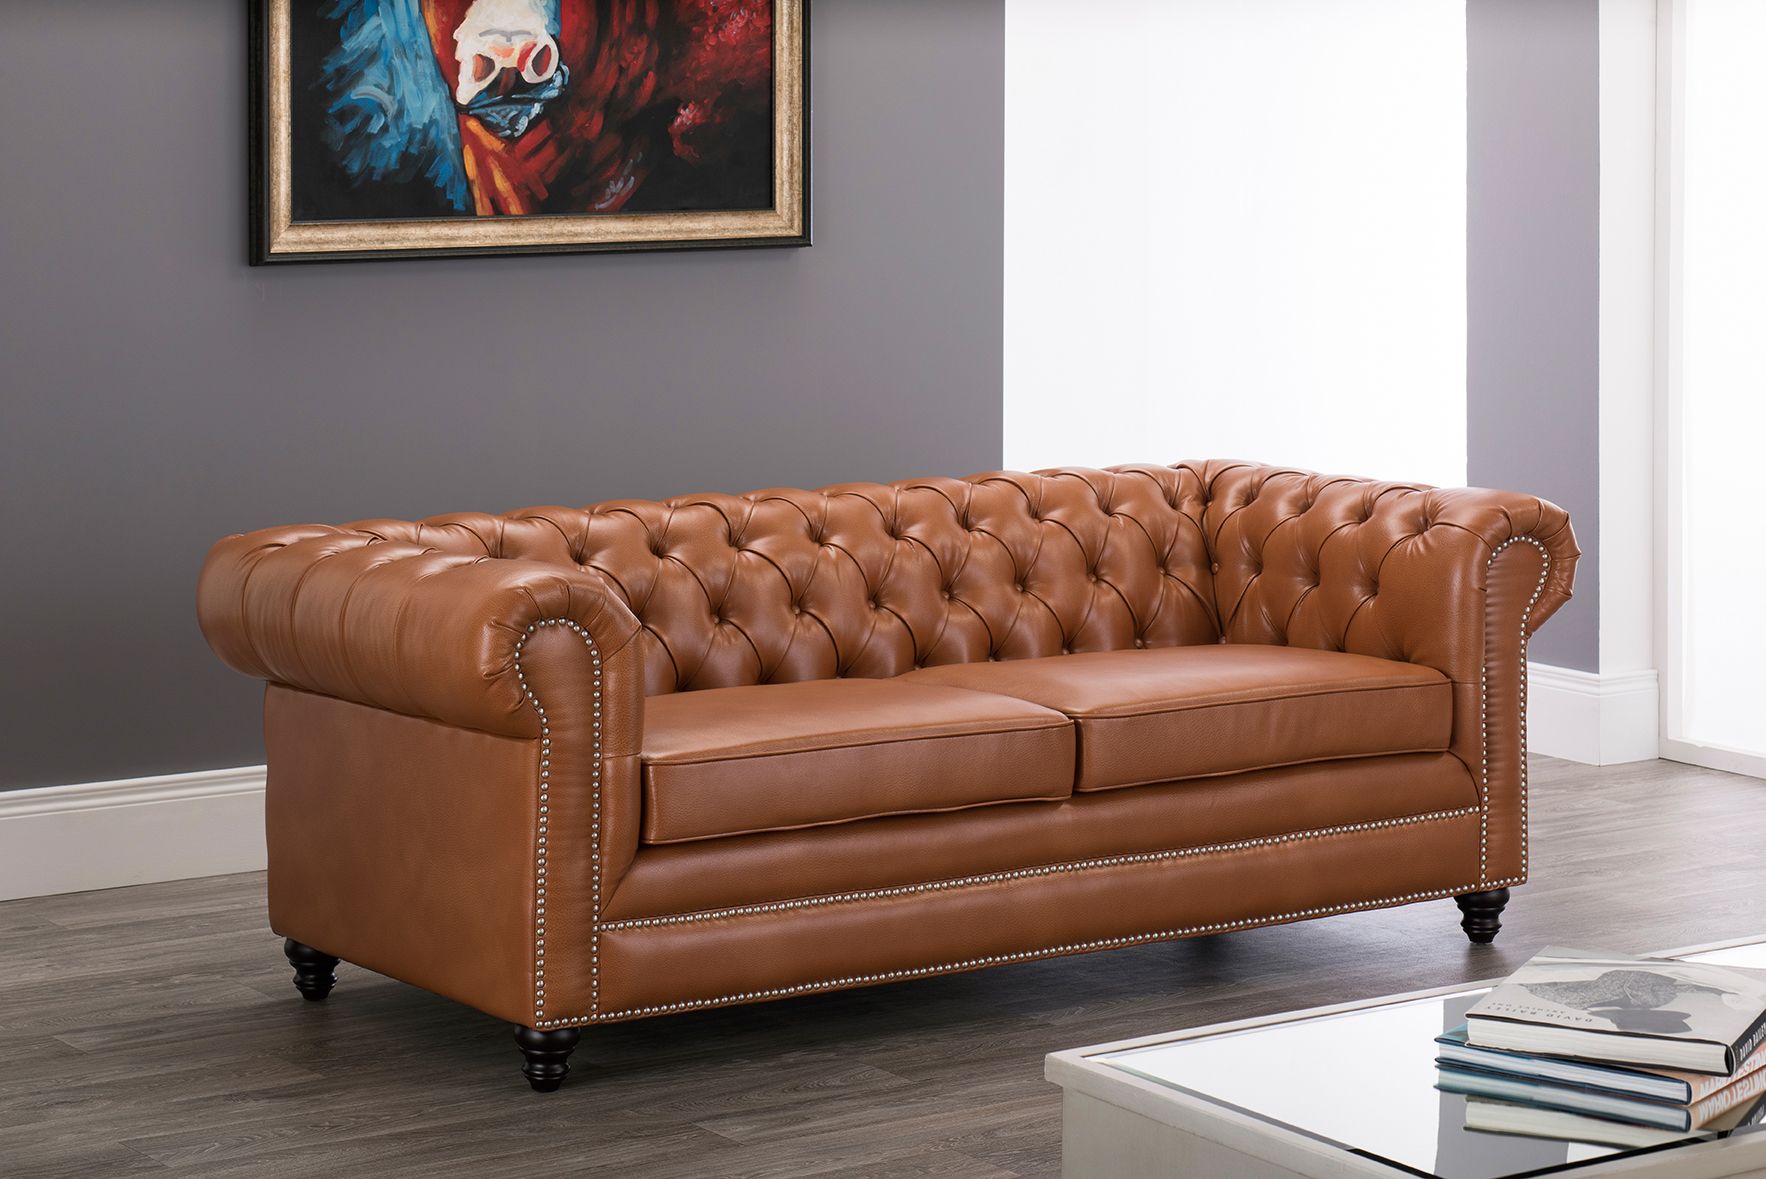 Tan Faux Leather Chesterfield Sofa Sets - Chic Concept